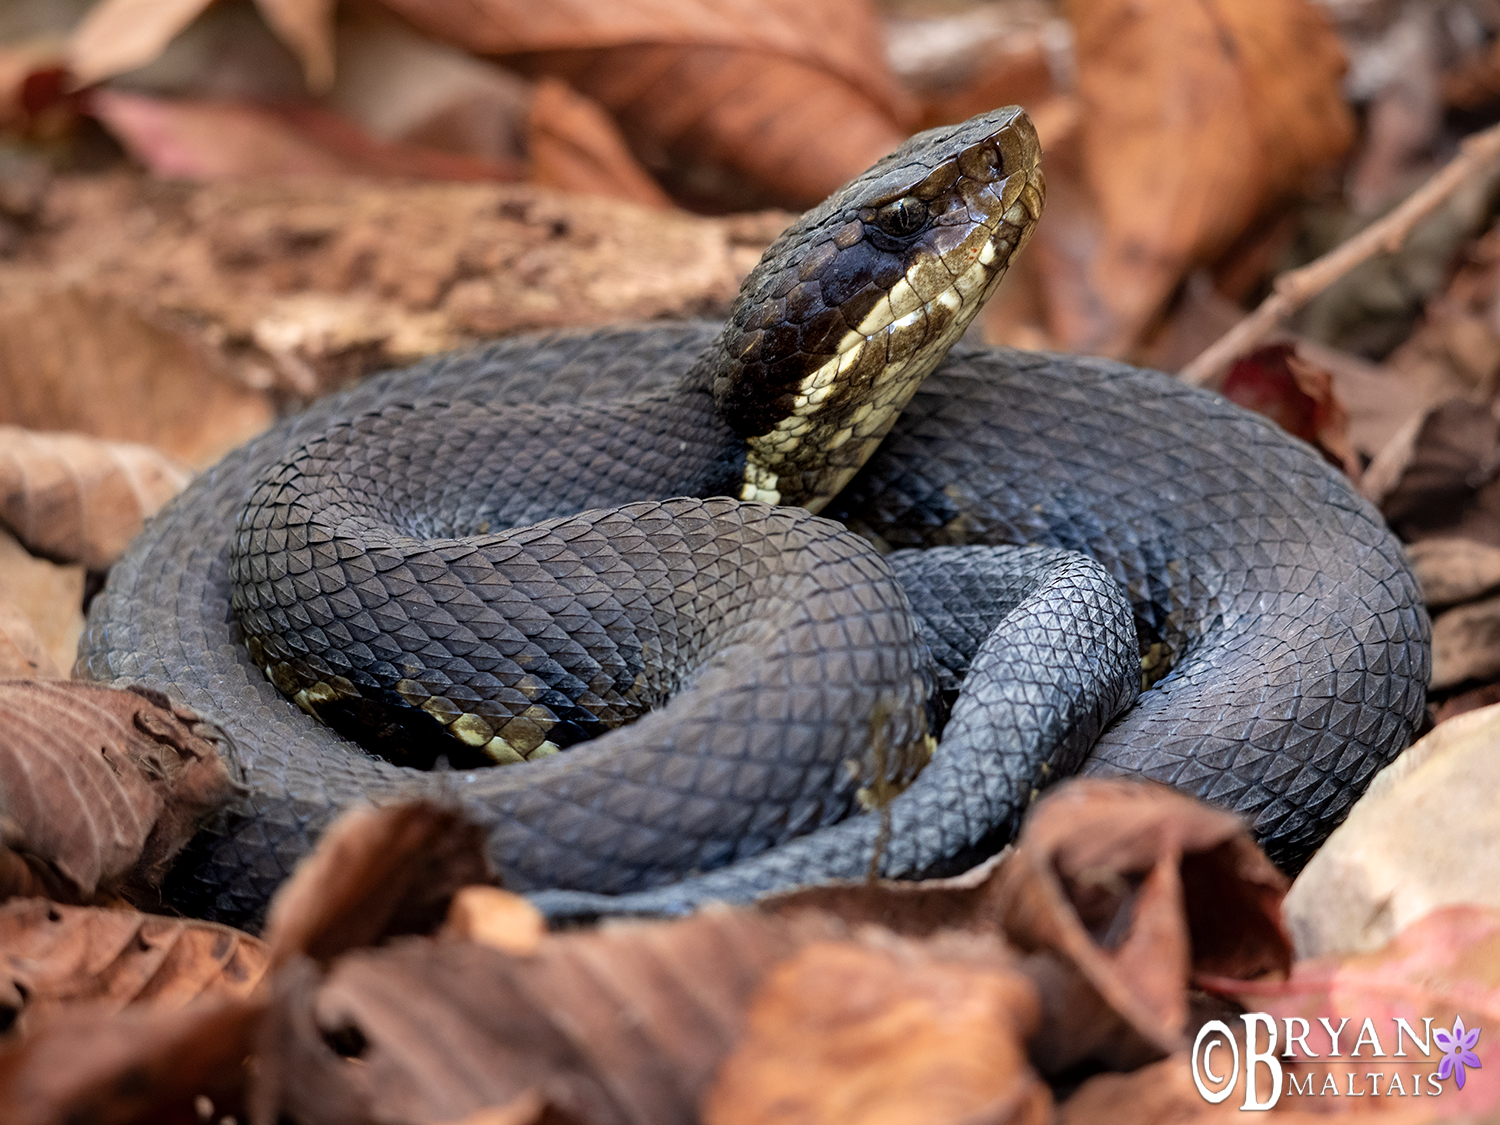 northern cottonmouth coiled in leaves herping photos